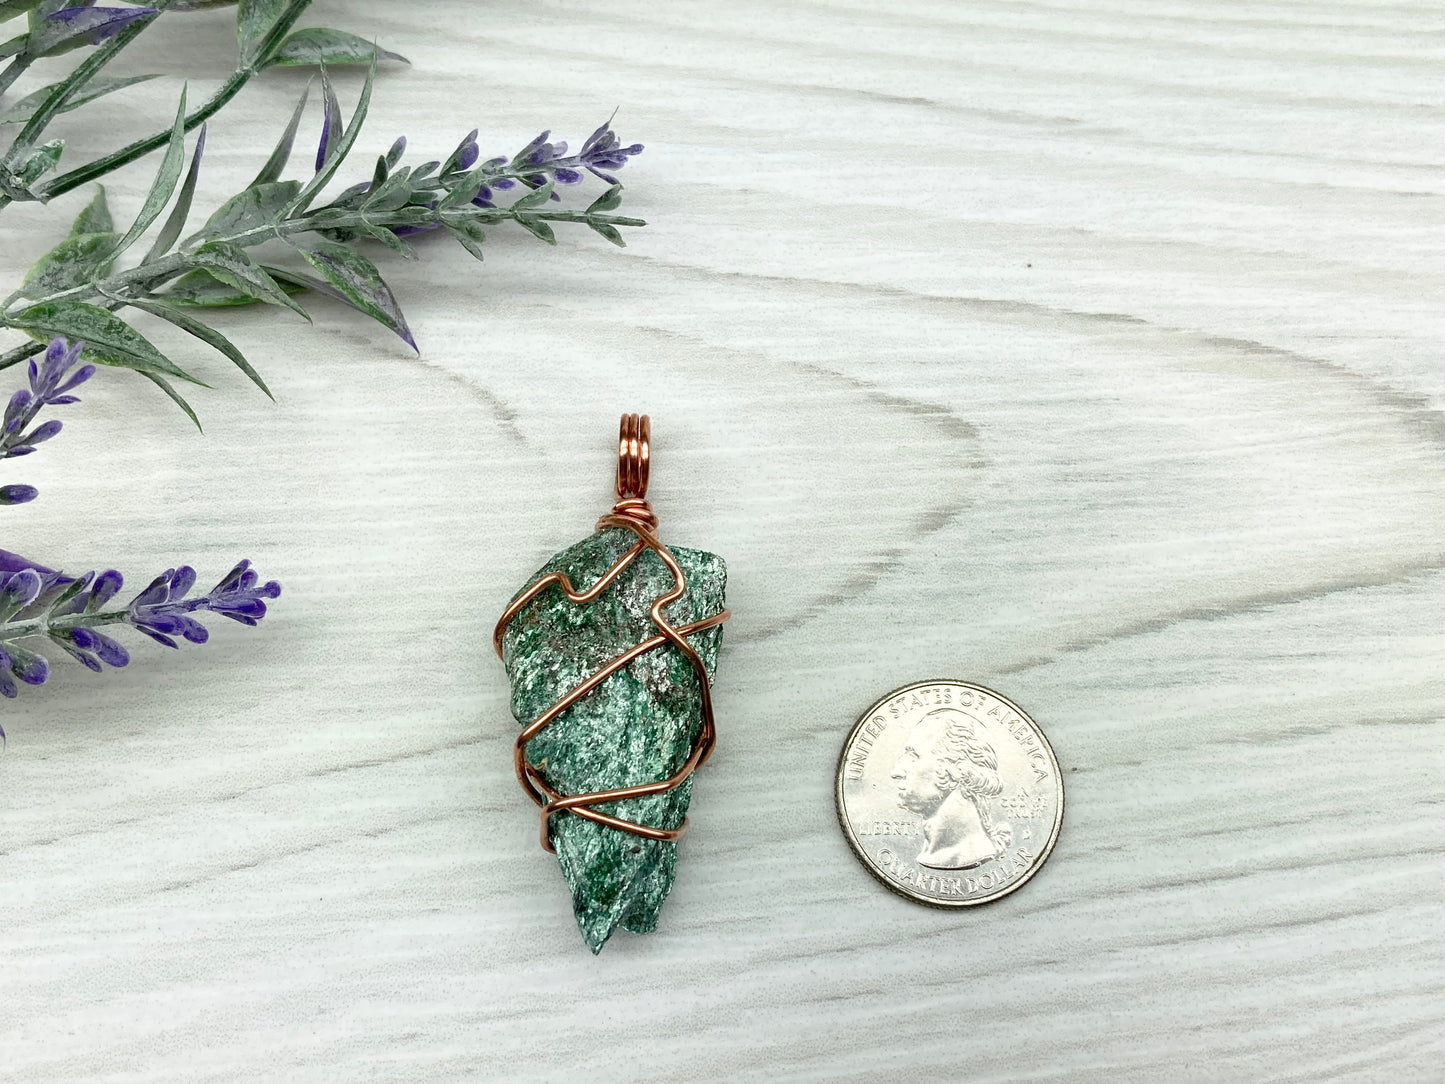 Raw Fuchsite Necklace. Copper Wire Wrapped Crystal Pendant. Shimmery Green Stone. Comes On A Black chain. Handmade New Age Jewelry.